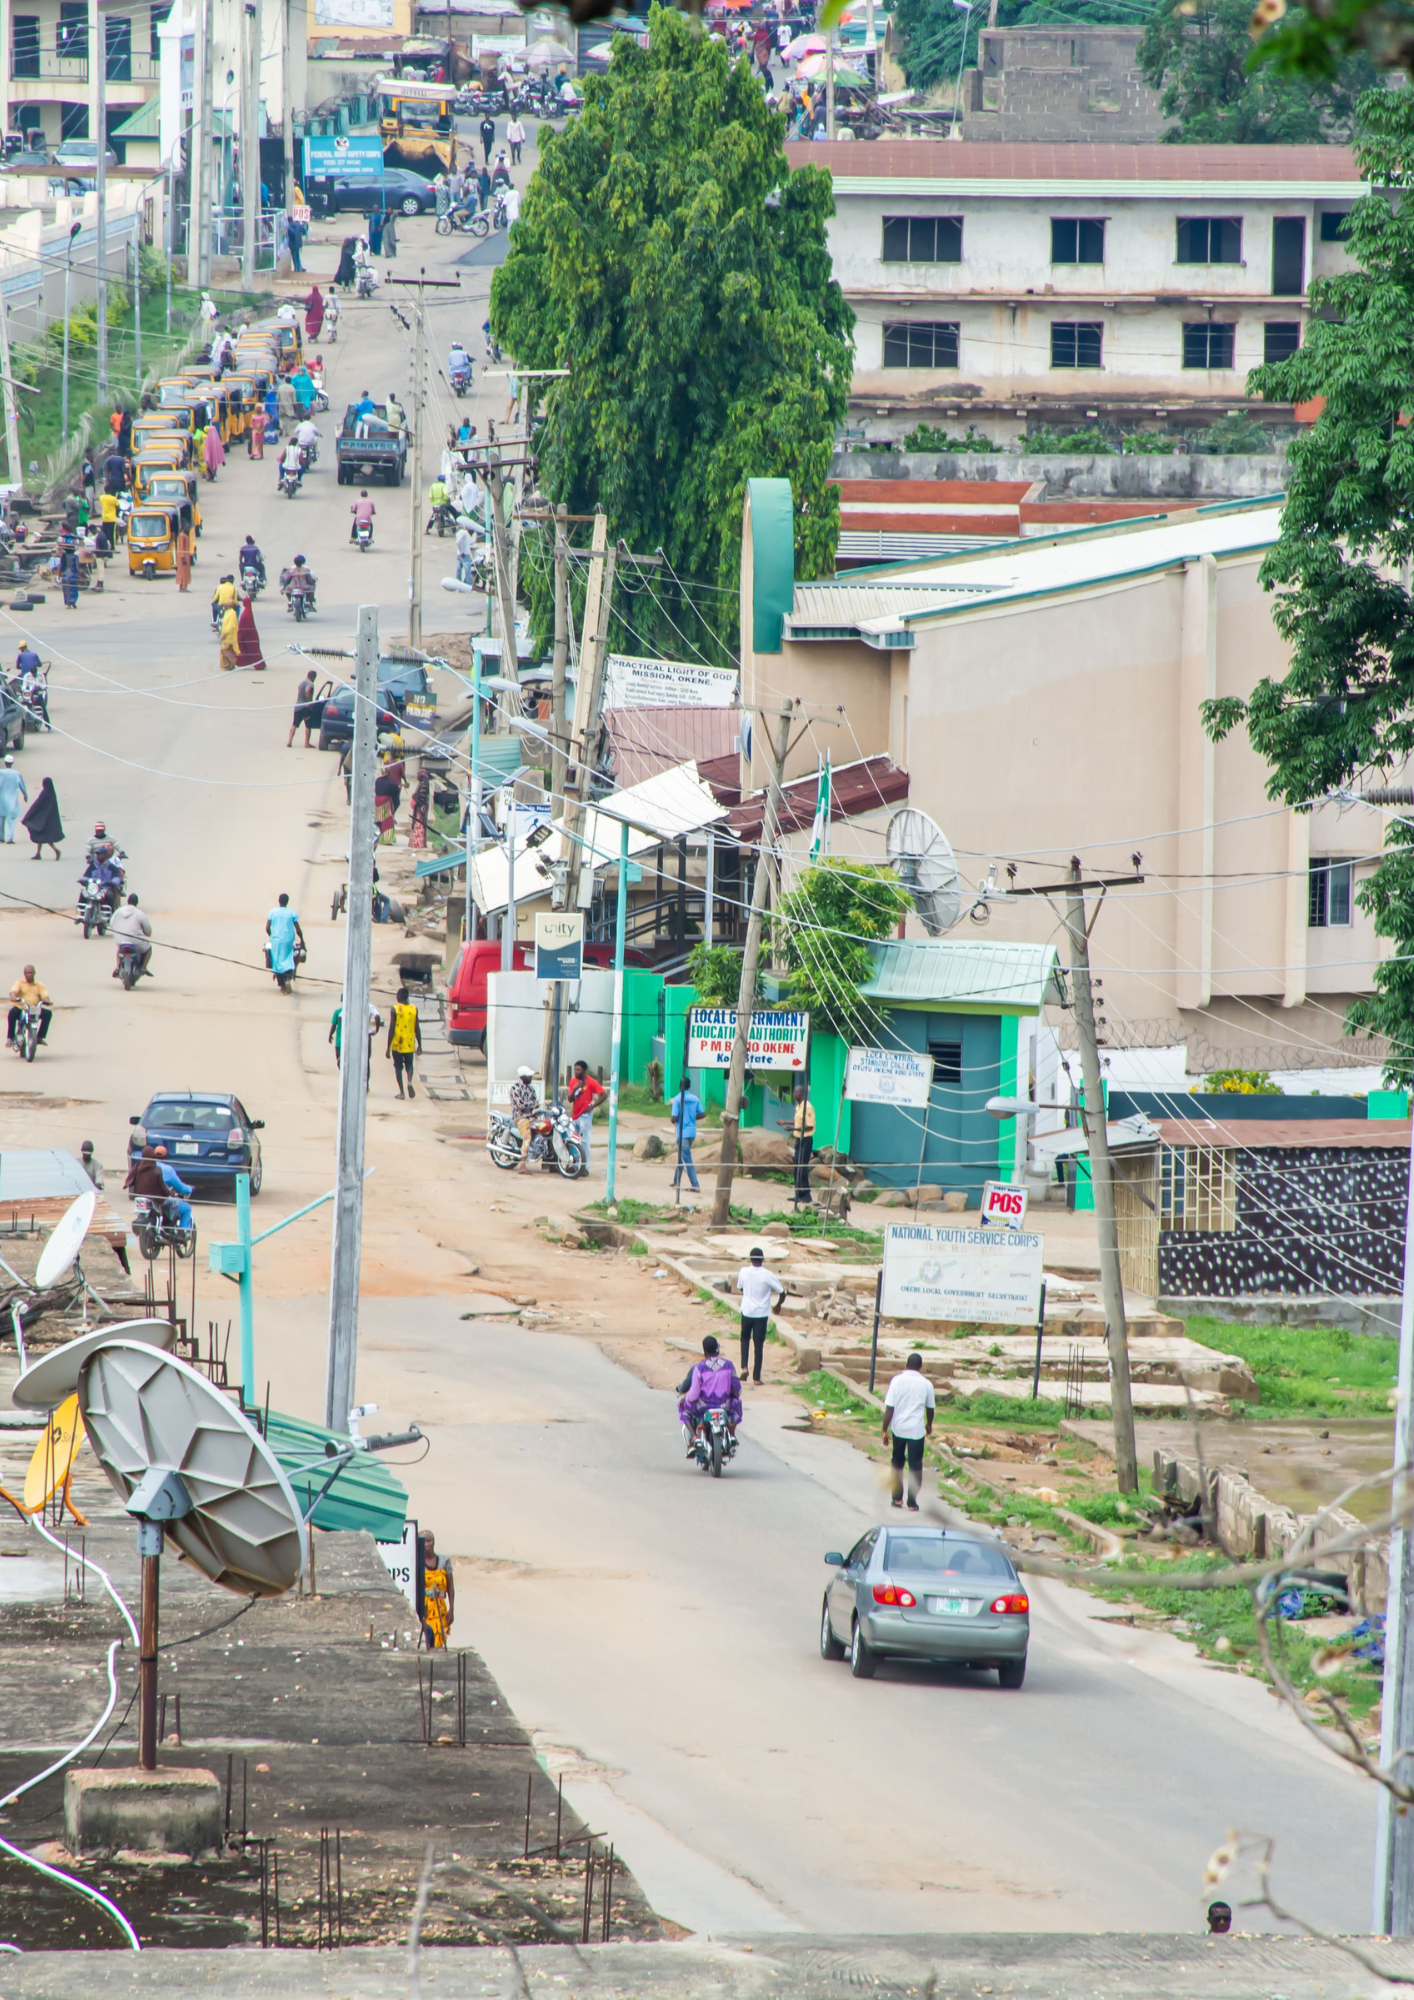 Does Power Sector Reform Facilitate Informal Economy Development A Study of Nigeria’s Experience in the Southeast Geopolitical Zone 